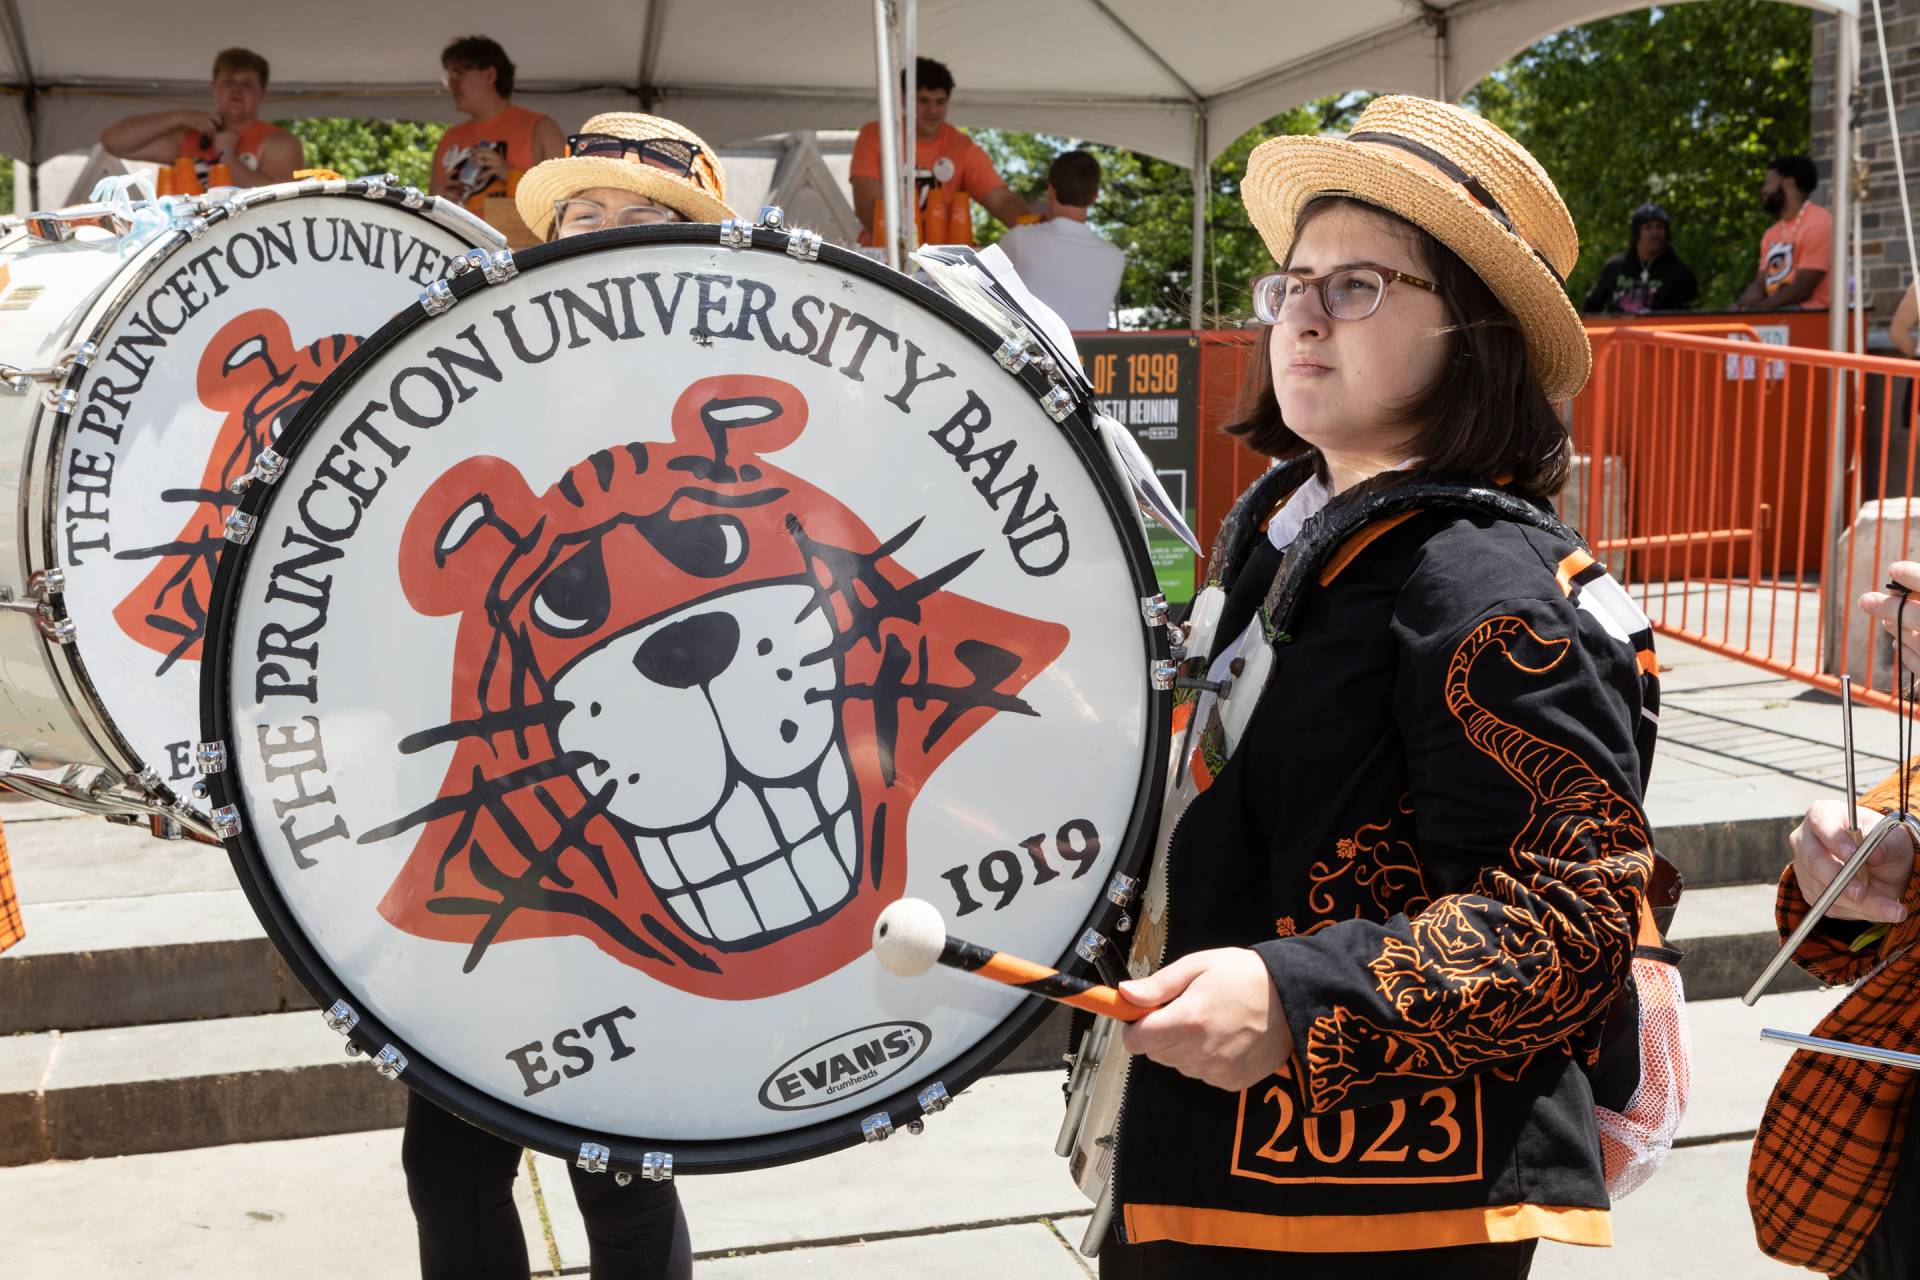 A base dummer plays along with the Princeton University Band